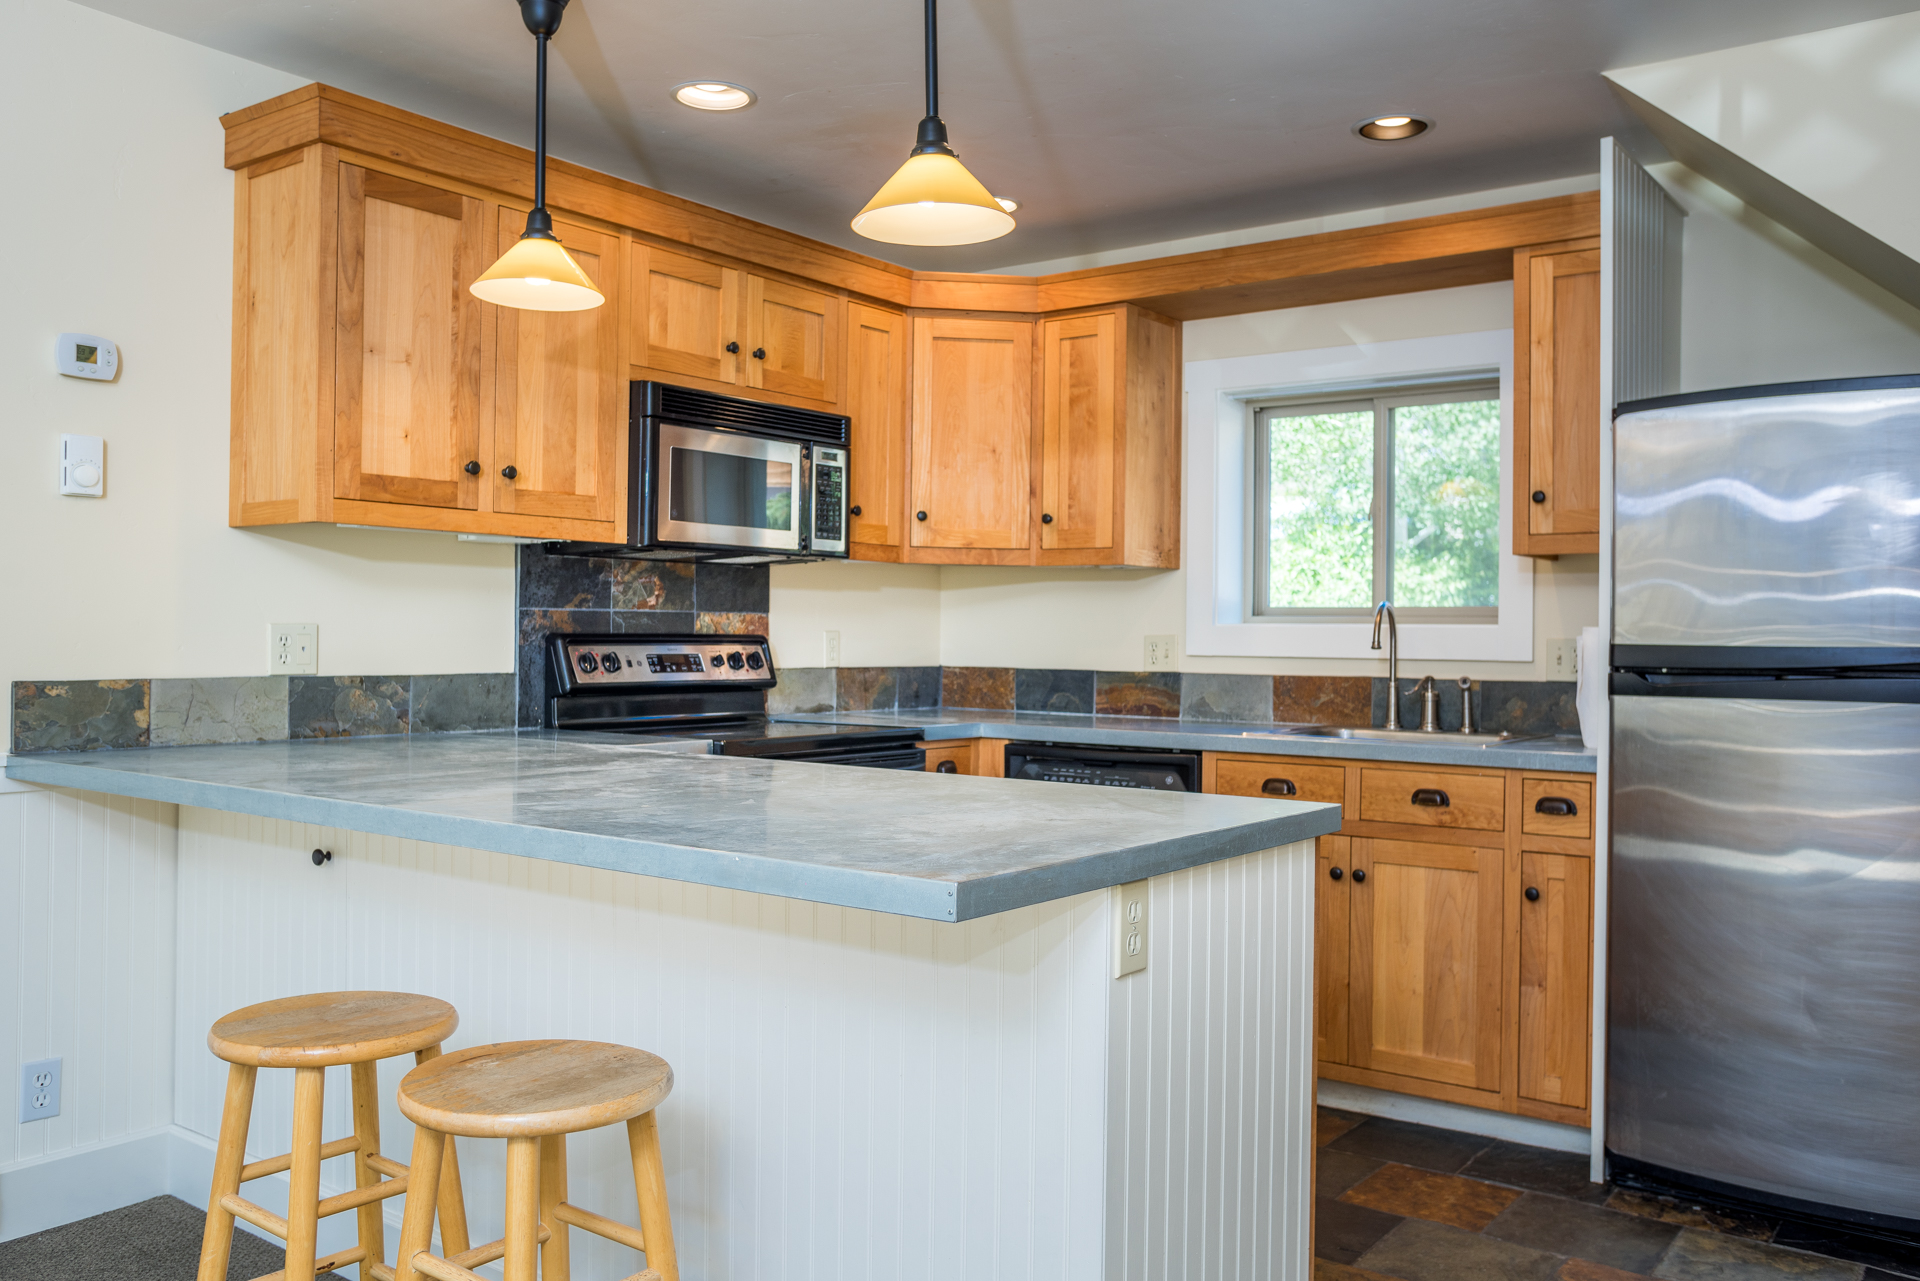 This Featured Listing in Downtown Ketchum has a custom kitchen. 